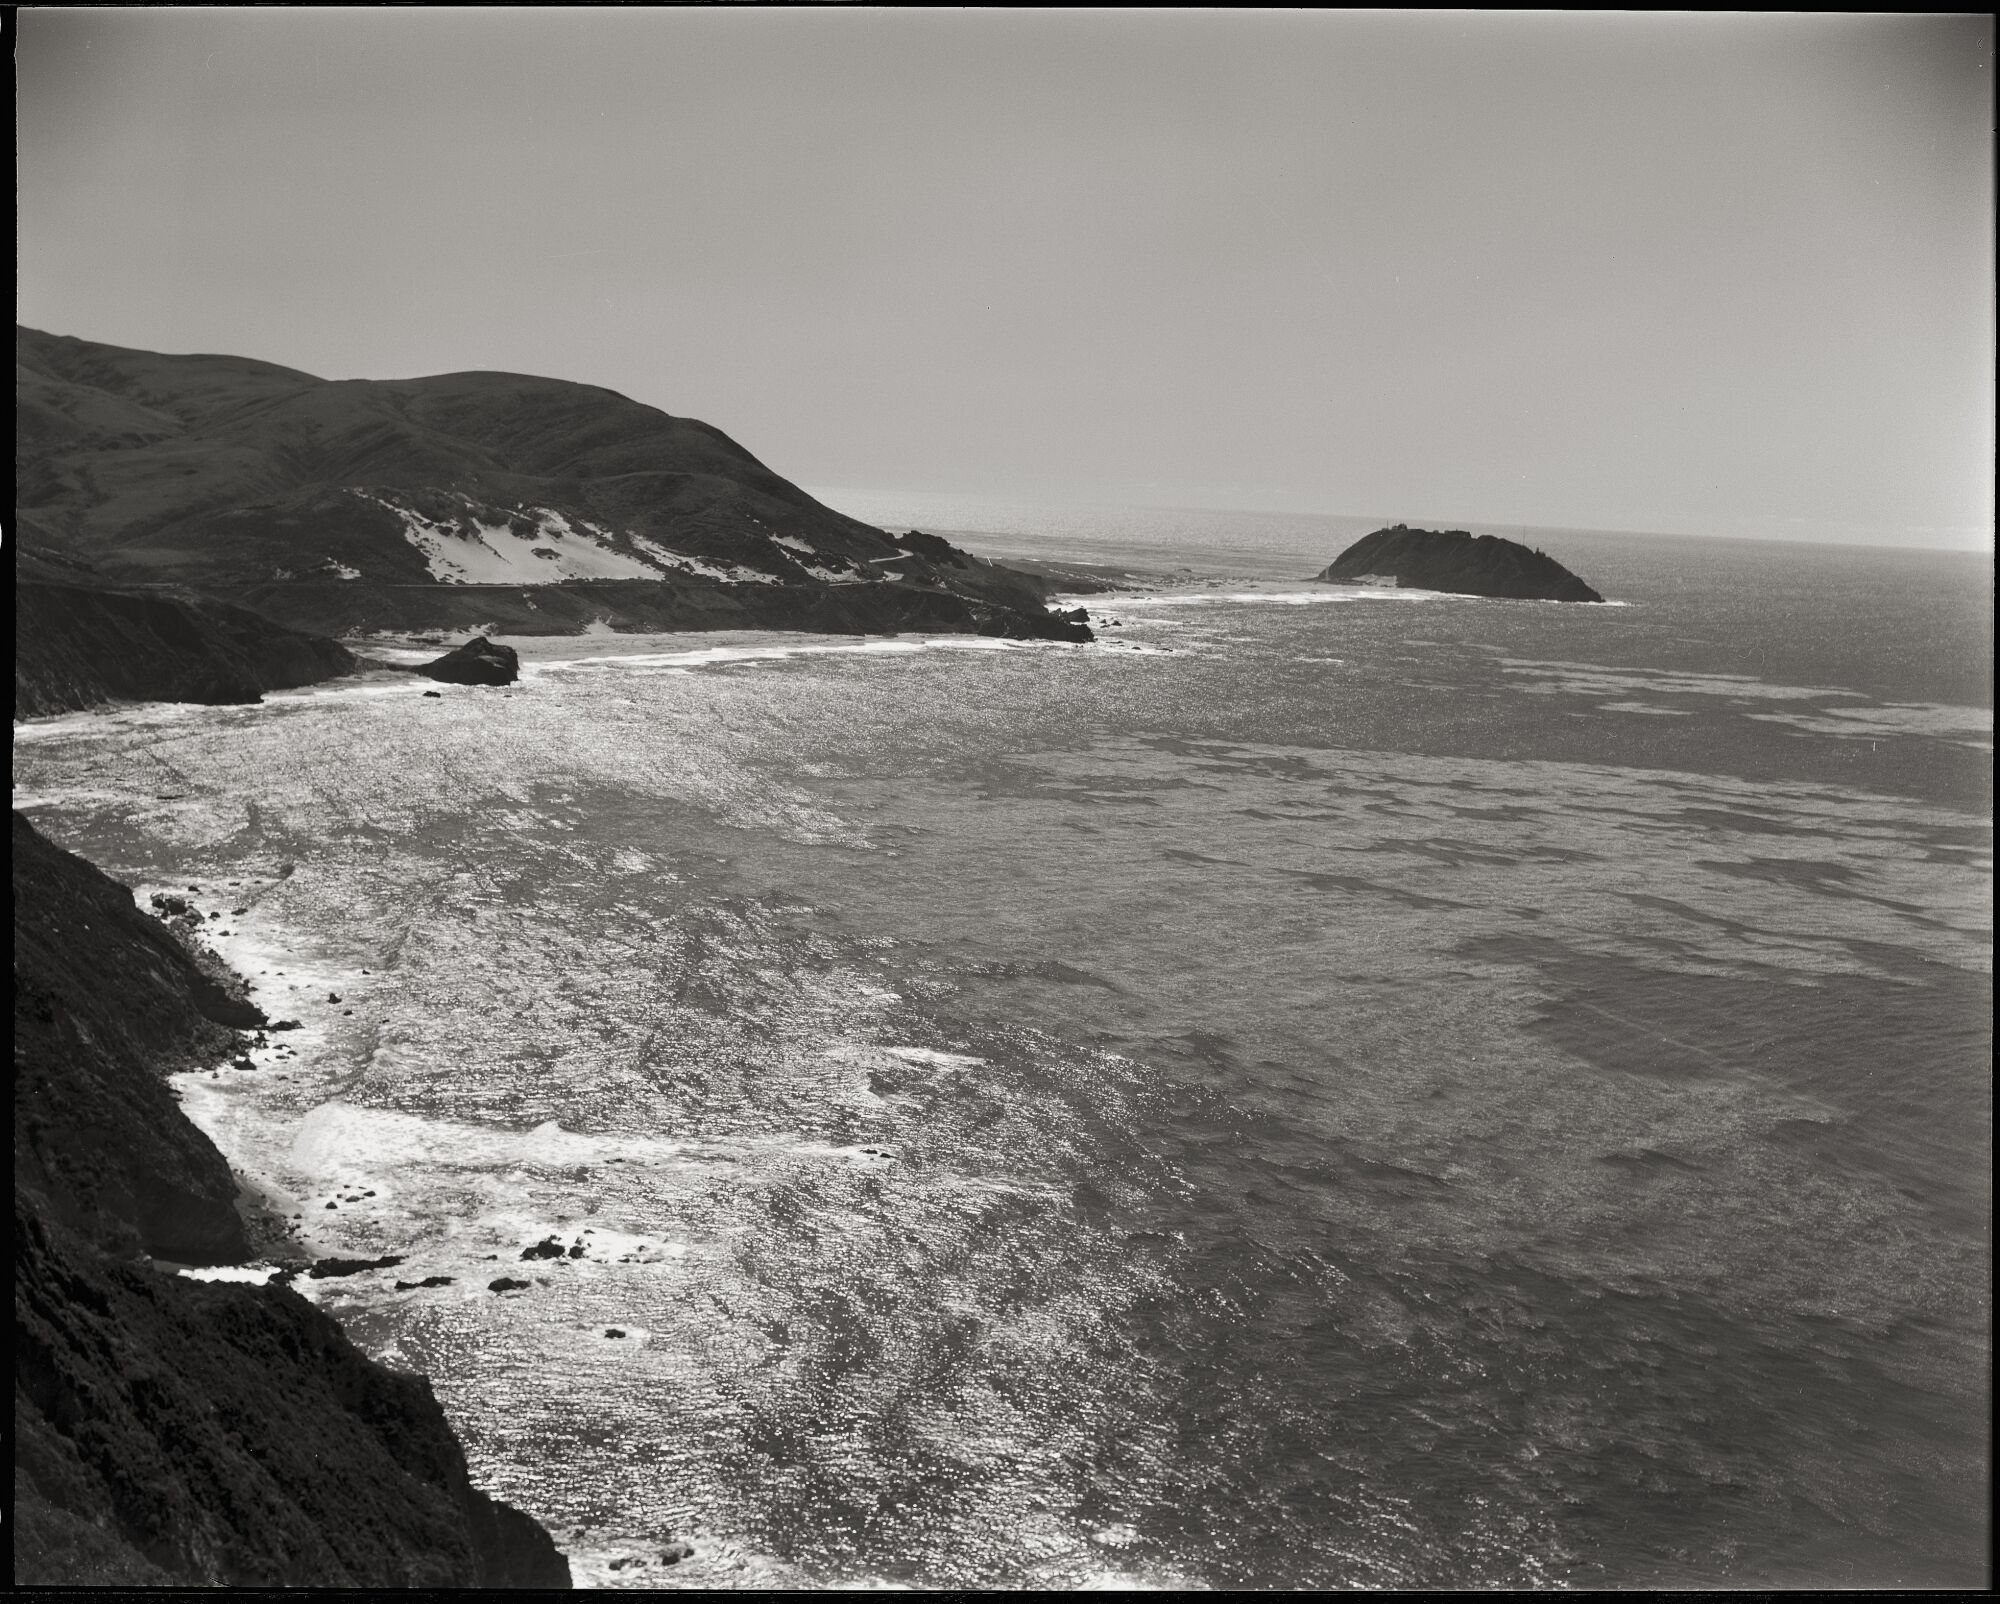 A historic black and white photo of a coastline from 1967.